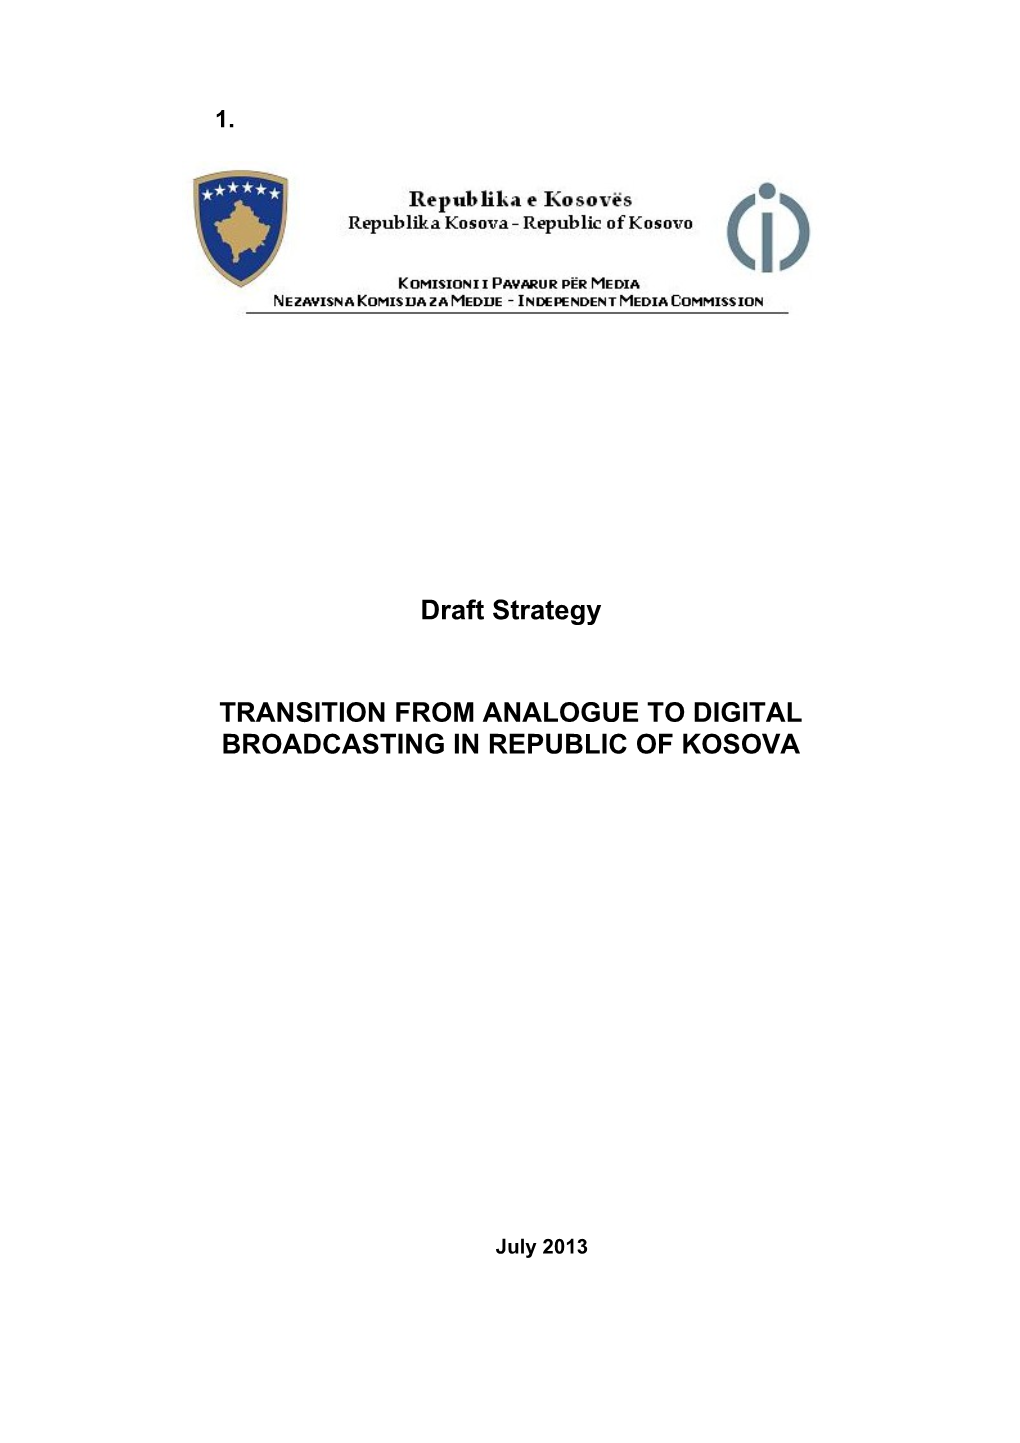 Transition from Analogue to Digital Broadcasting in Republic of Kosova